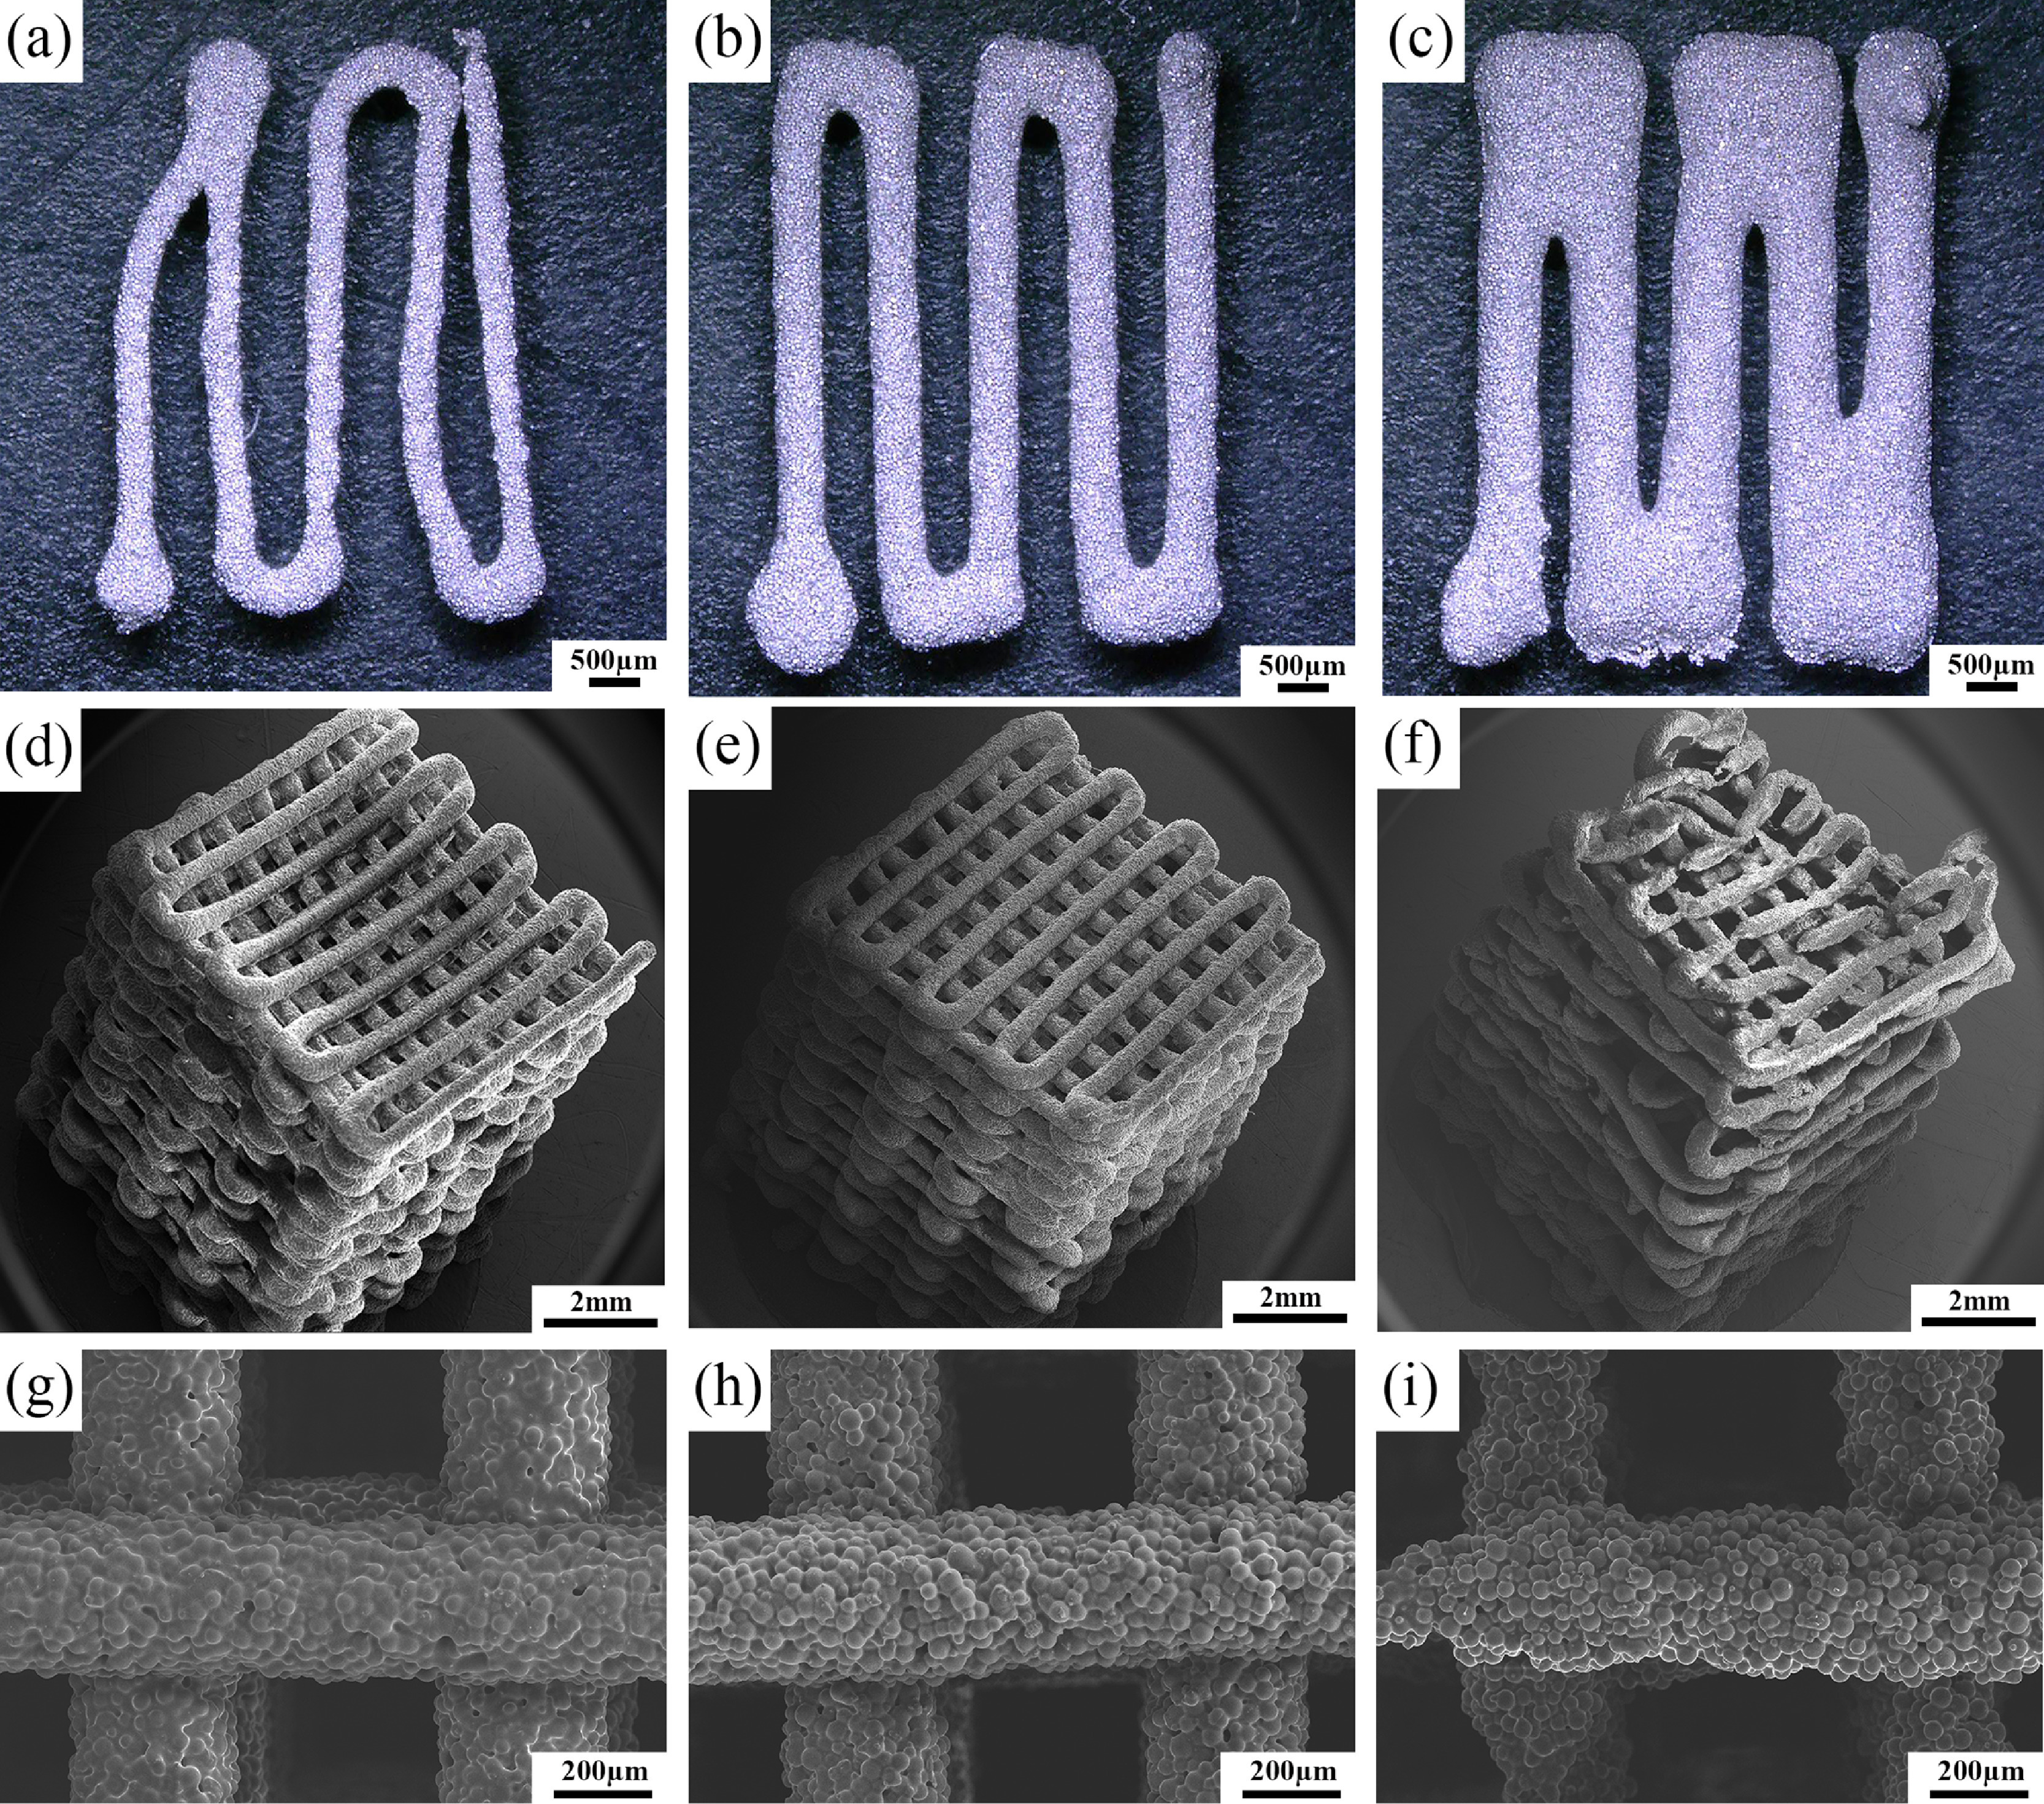 3D printed porous magnesium scaffolds show potential as bone-substituting material